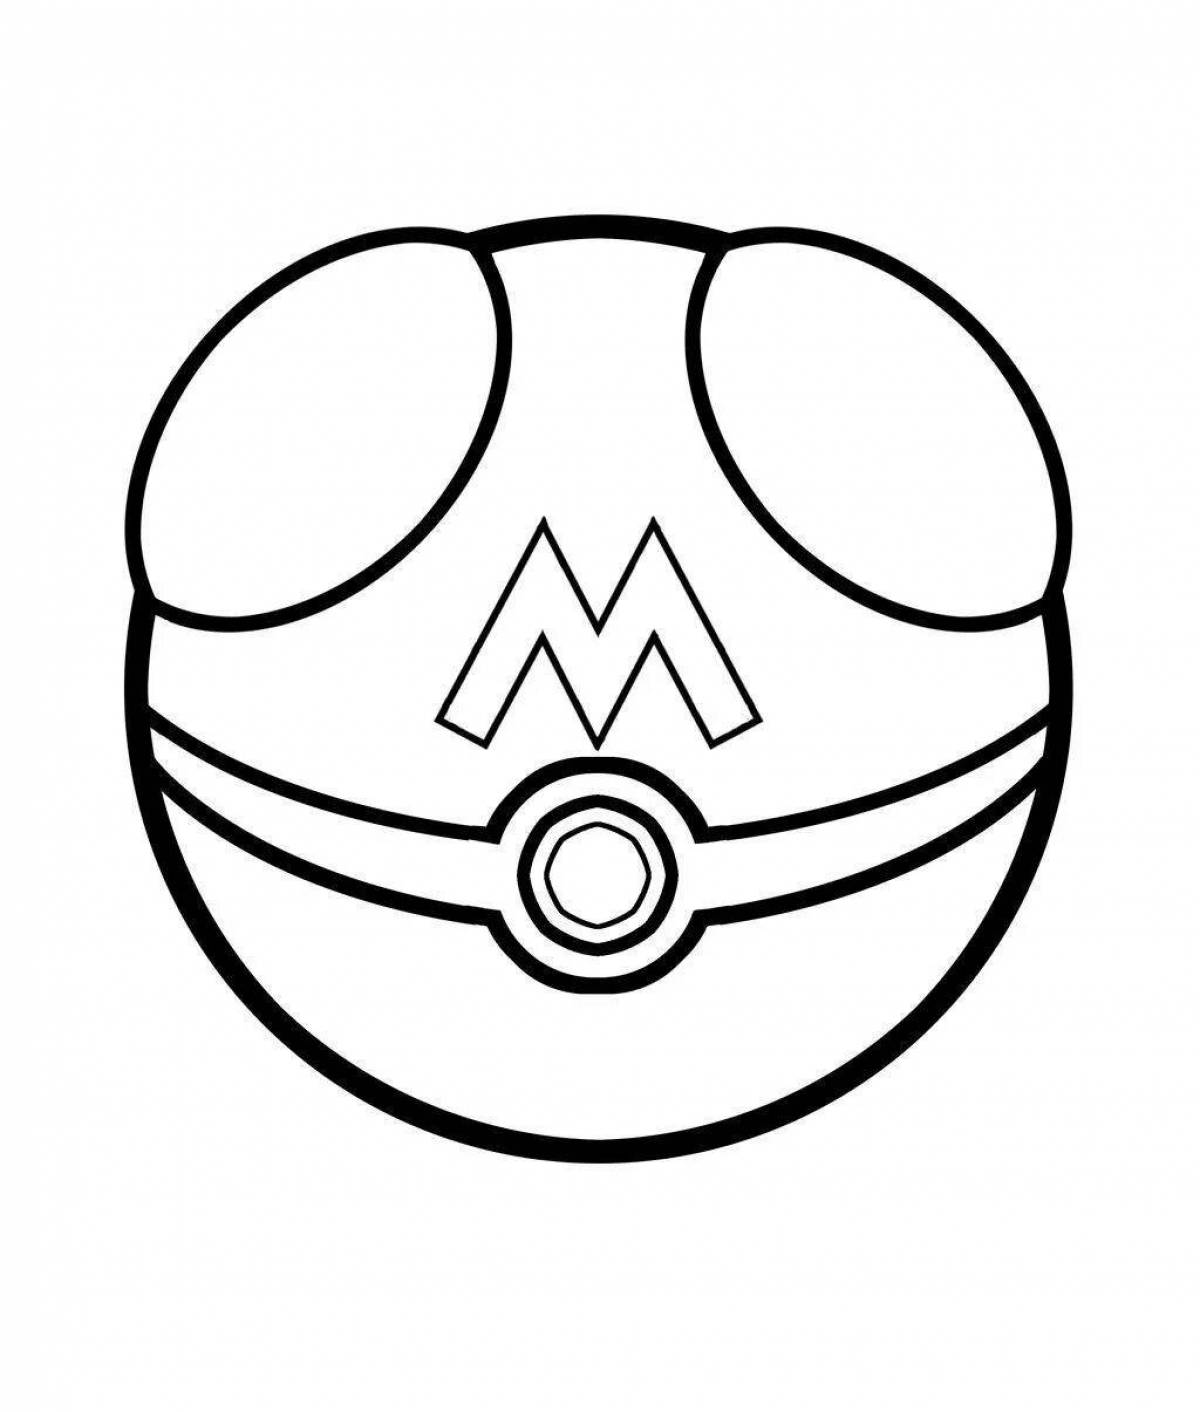 Colorful pikachu and pokeball coloring page